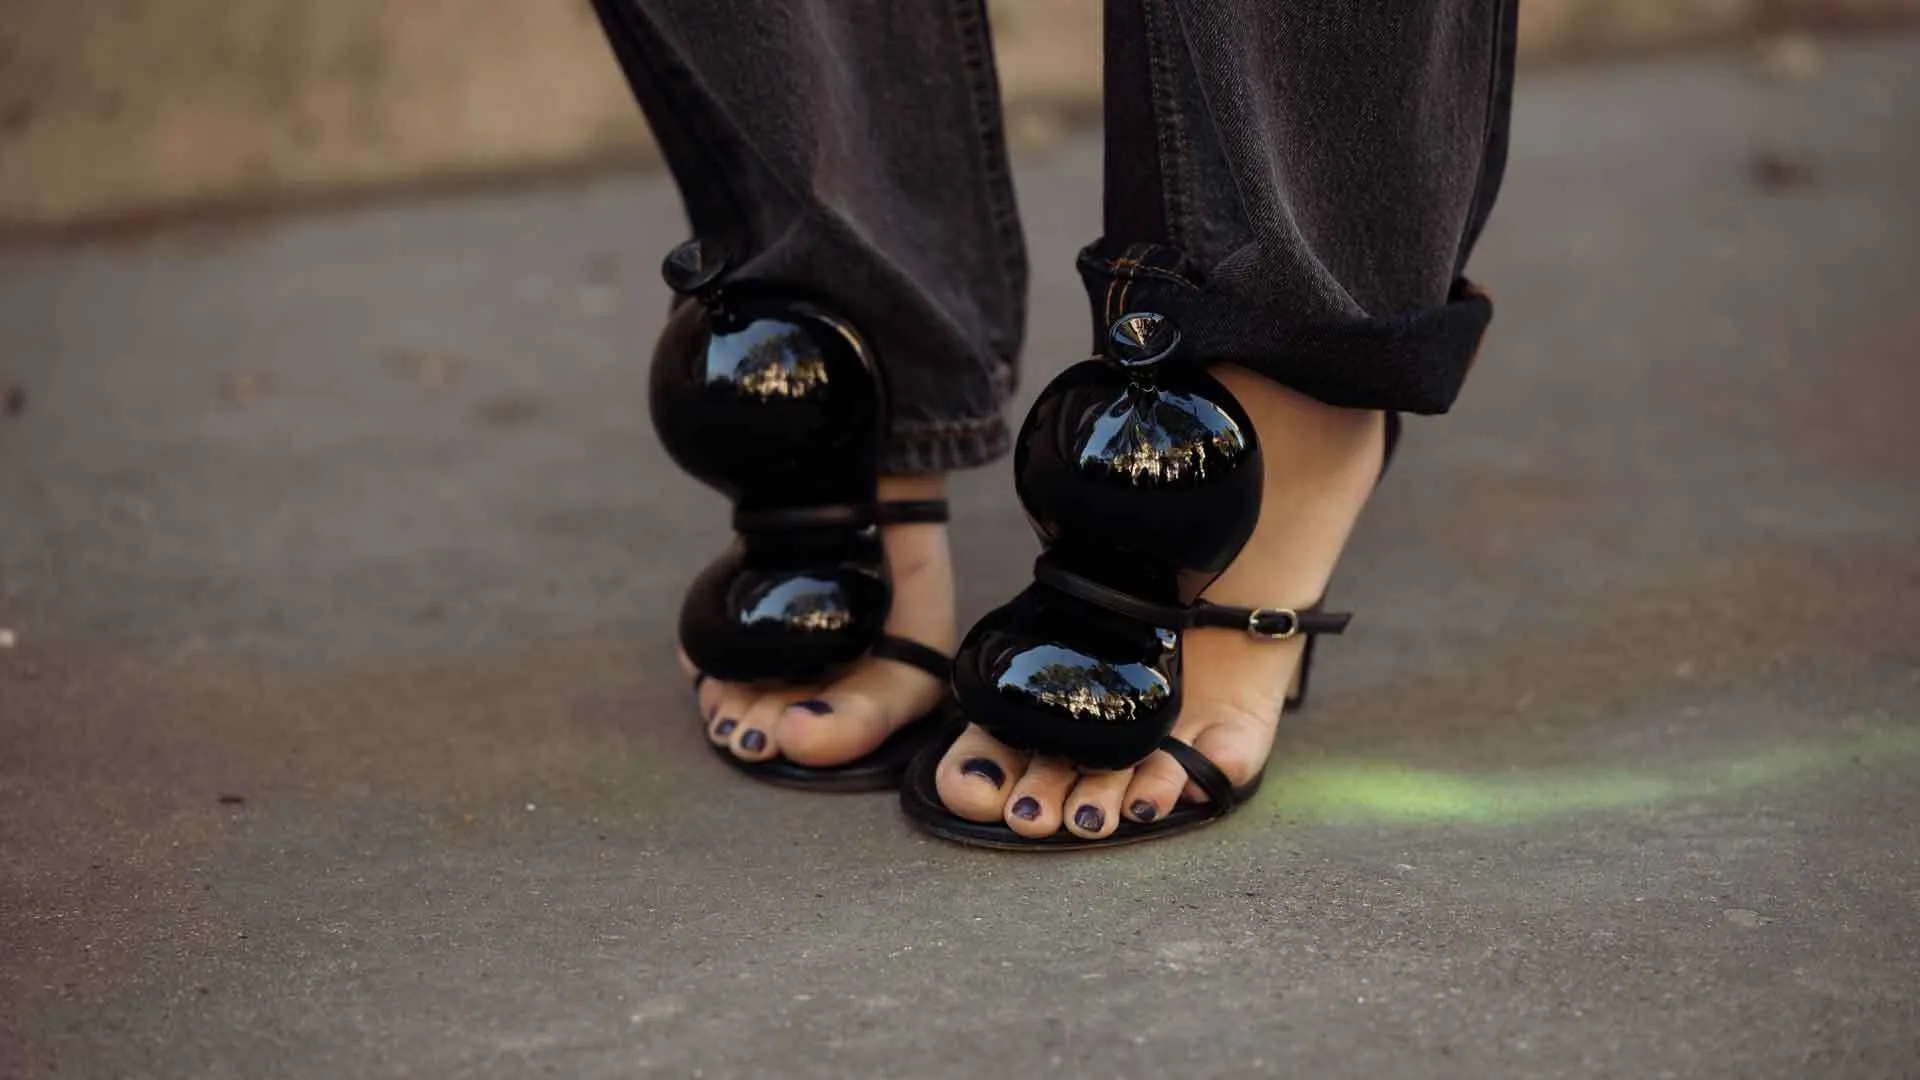 Crazy or stylish? These bizarre shoes are now worn by all fashion professionals